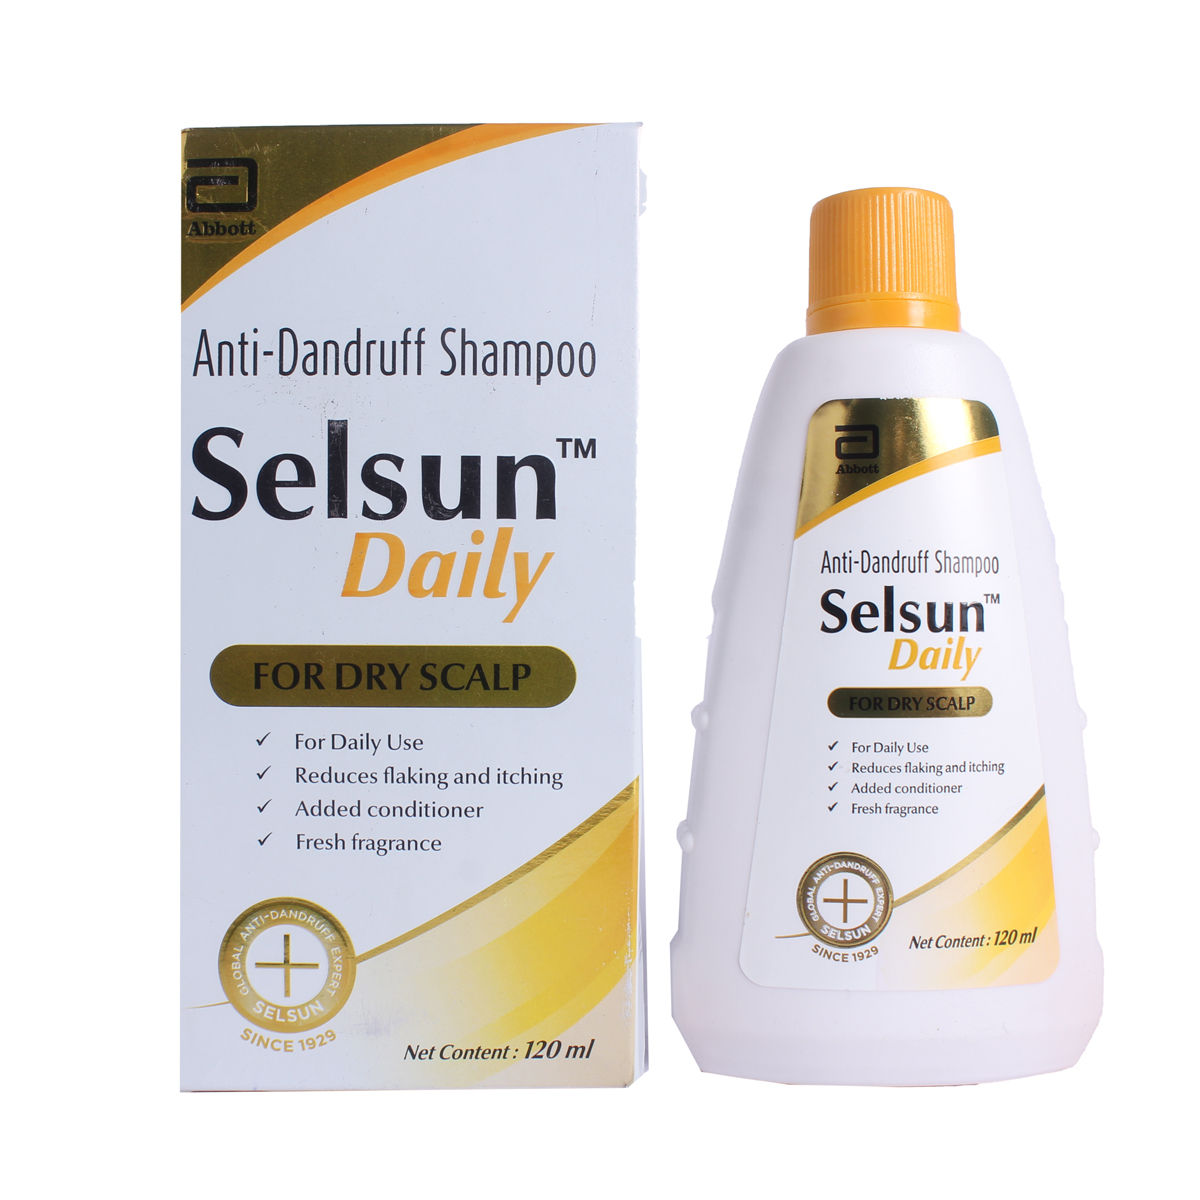 Buy Selsun Daily Shampoo for Dry Scalp, 120 ml Online